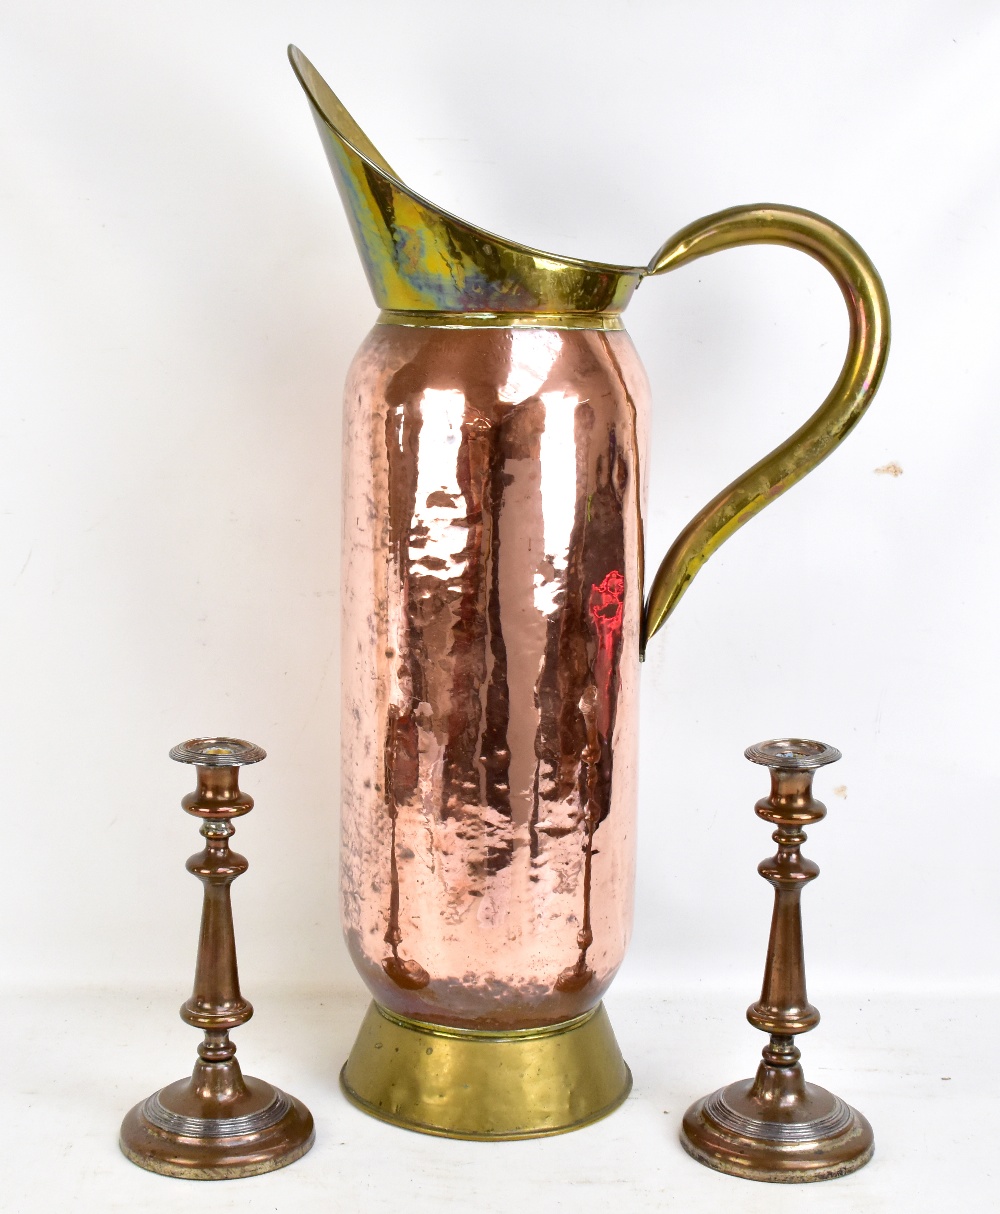 A large brass and copper stick stand, height approx 74cm, and a pair of 19th century electroplated